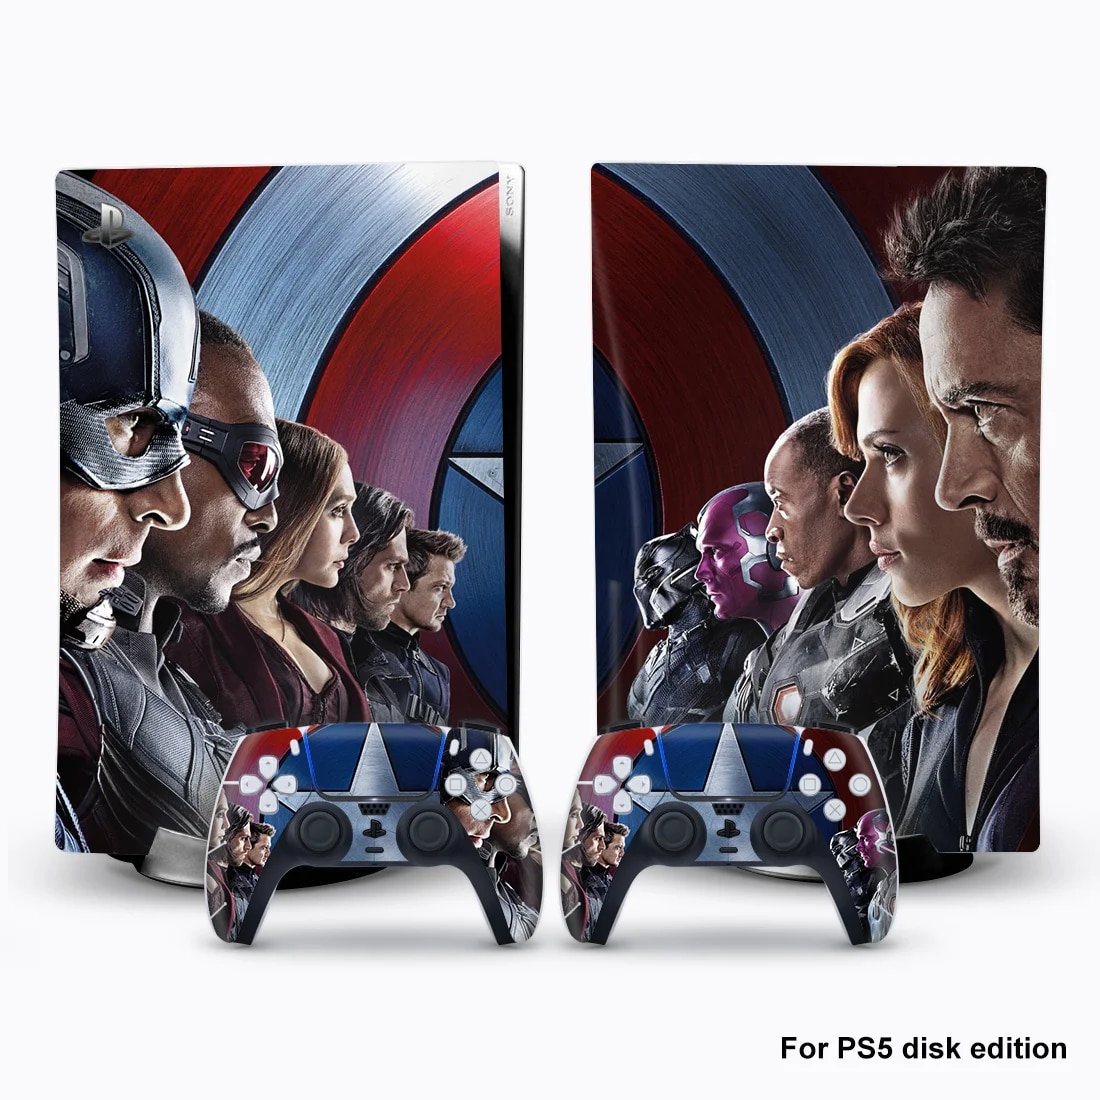 【Best Price Guaranteed】 Captain America Man Venom Vinyl Skin Sticker For Ps5 Disk Edition Console And 2 Controllers Decal Cover Game Accessories